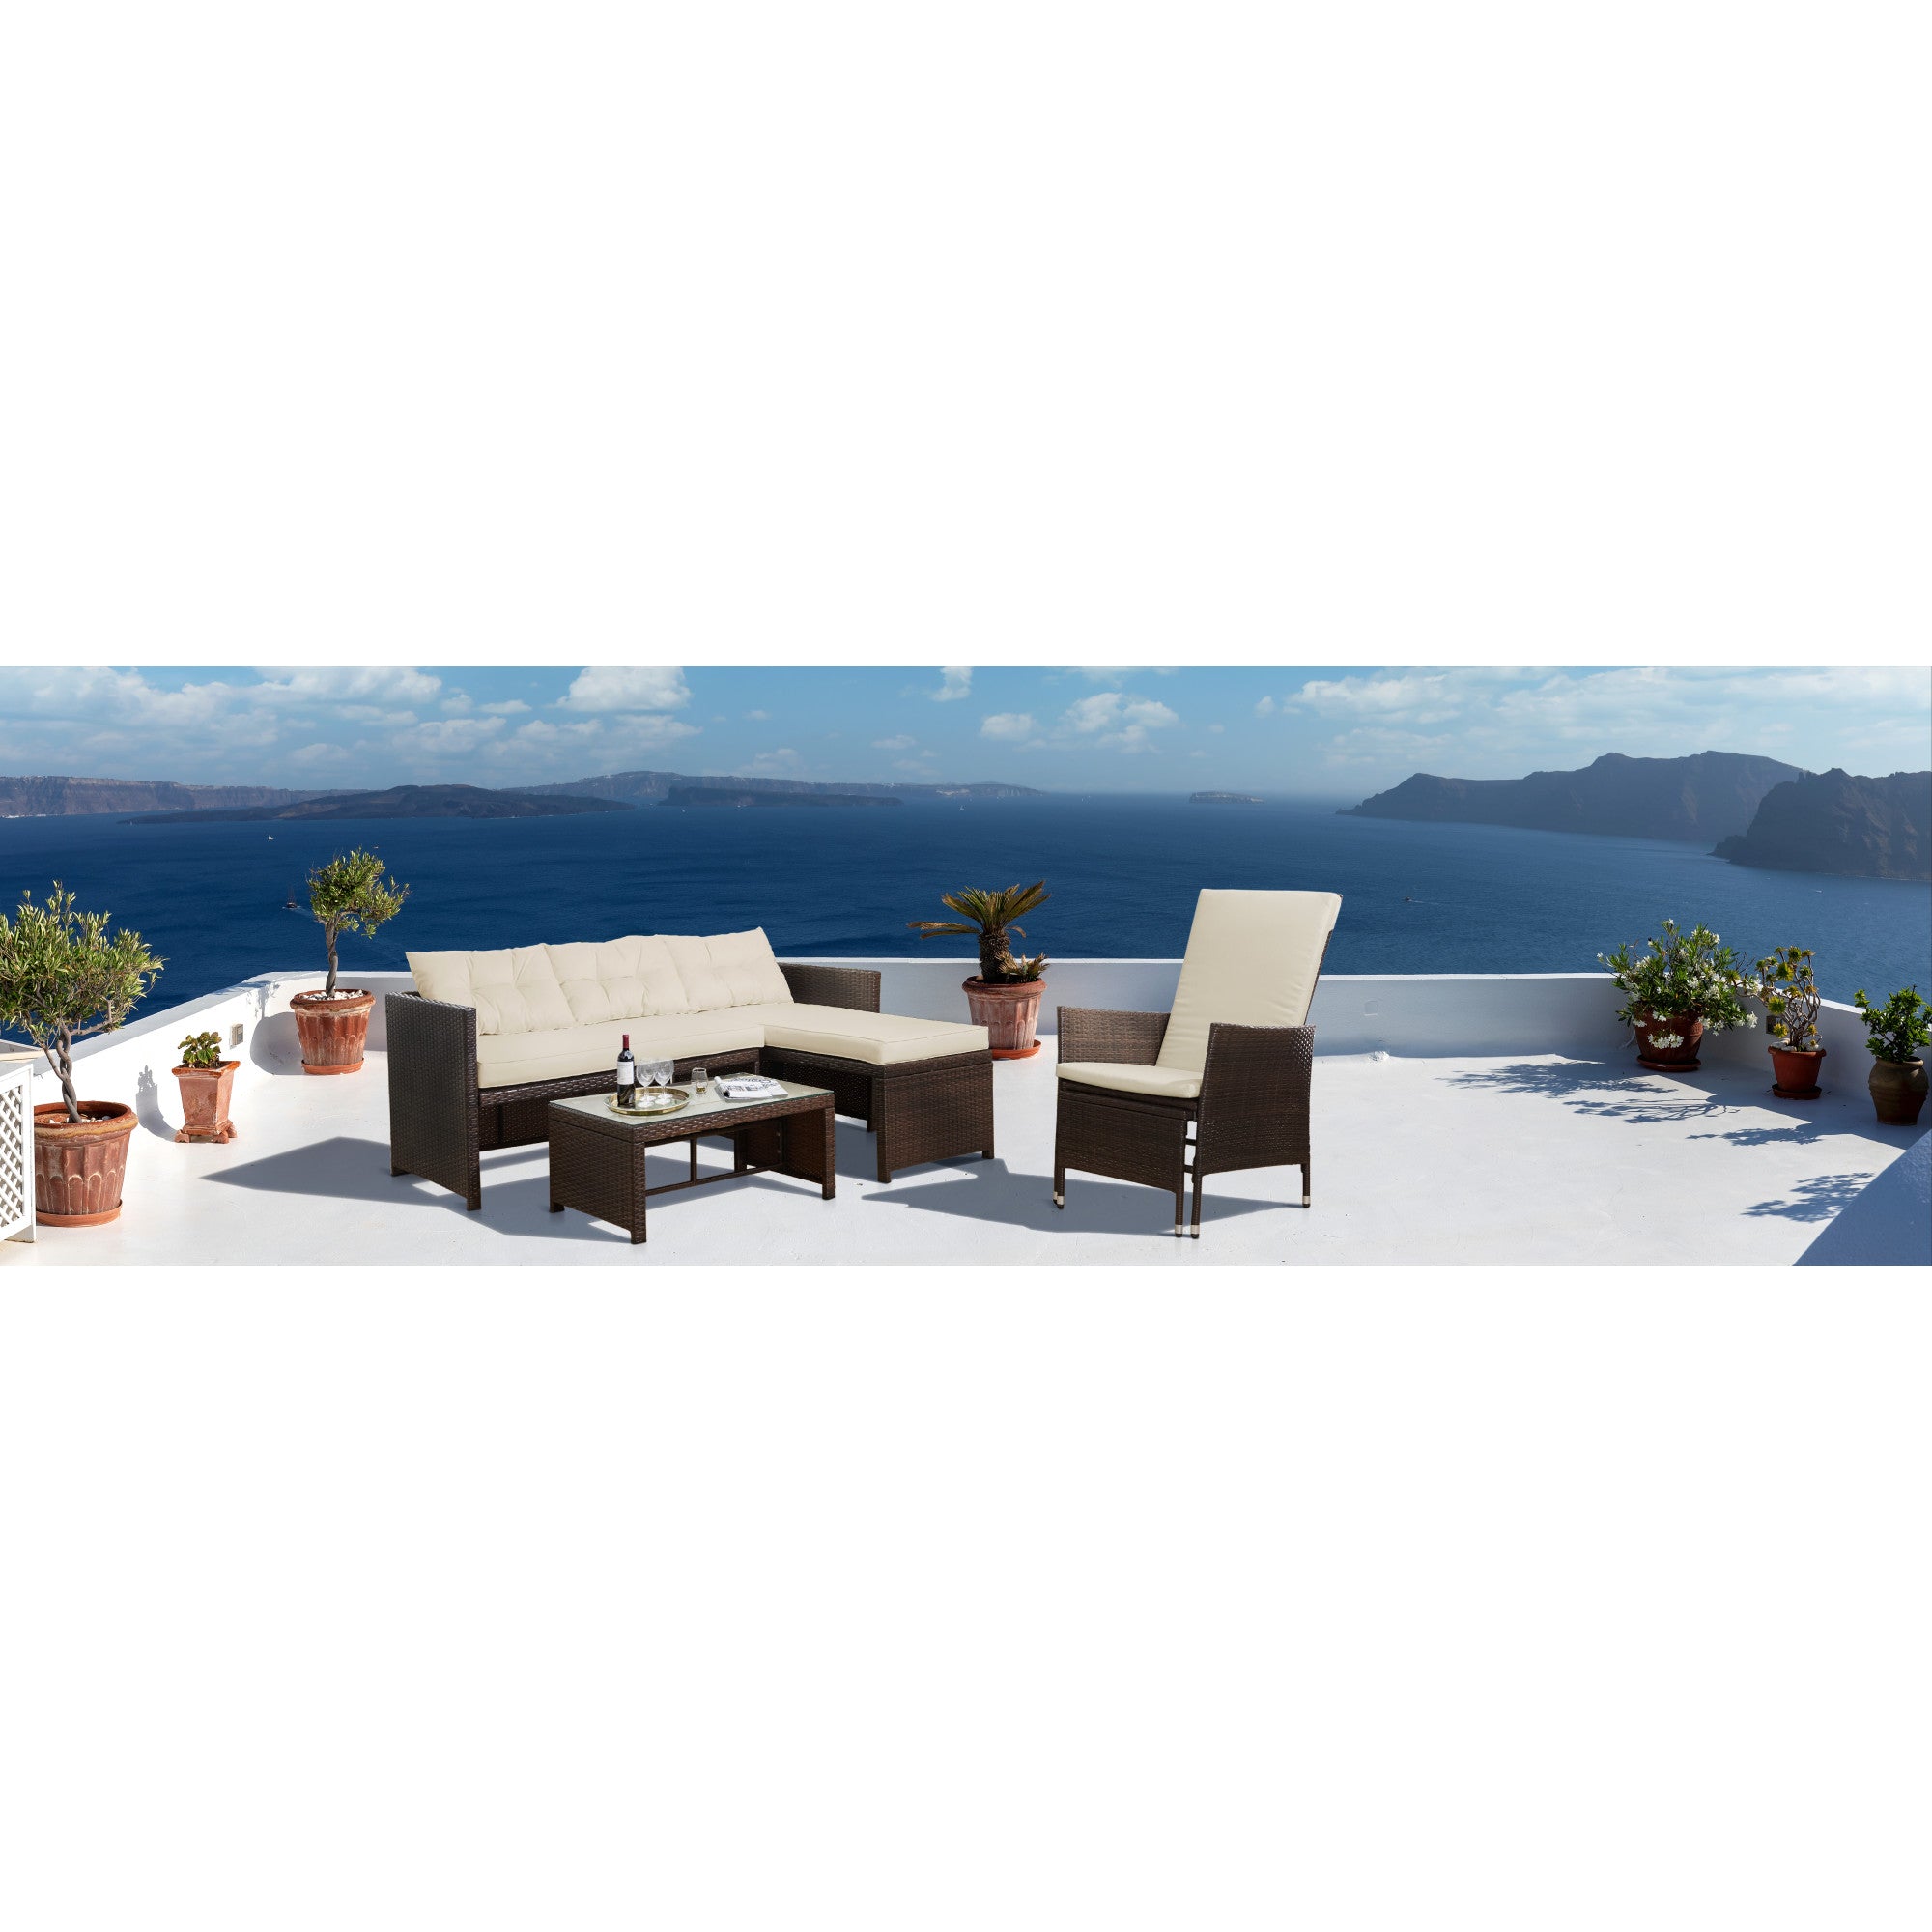 Teamson Home Outdoor 3-Piece Rattan Patio Sectional Set with Loveseat, Chaise Lounge and Coffee Table, Brown/White